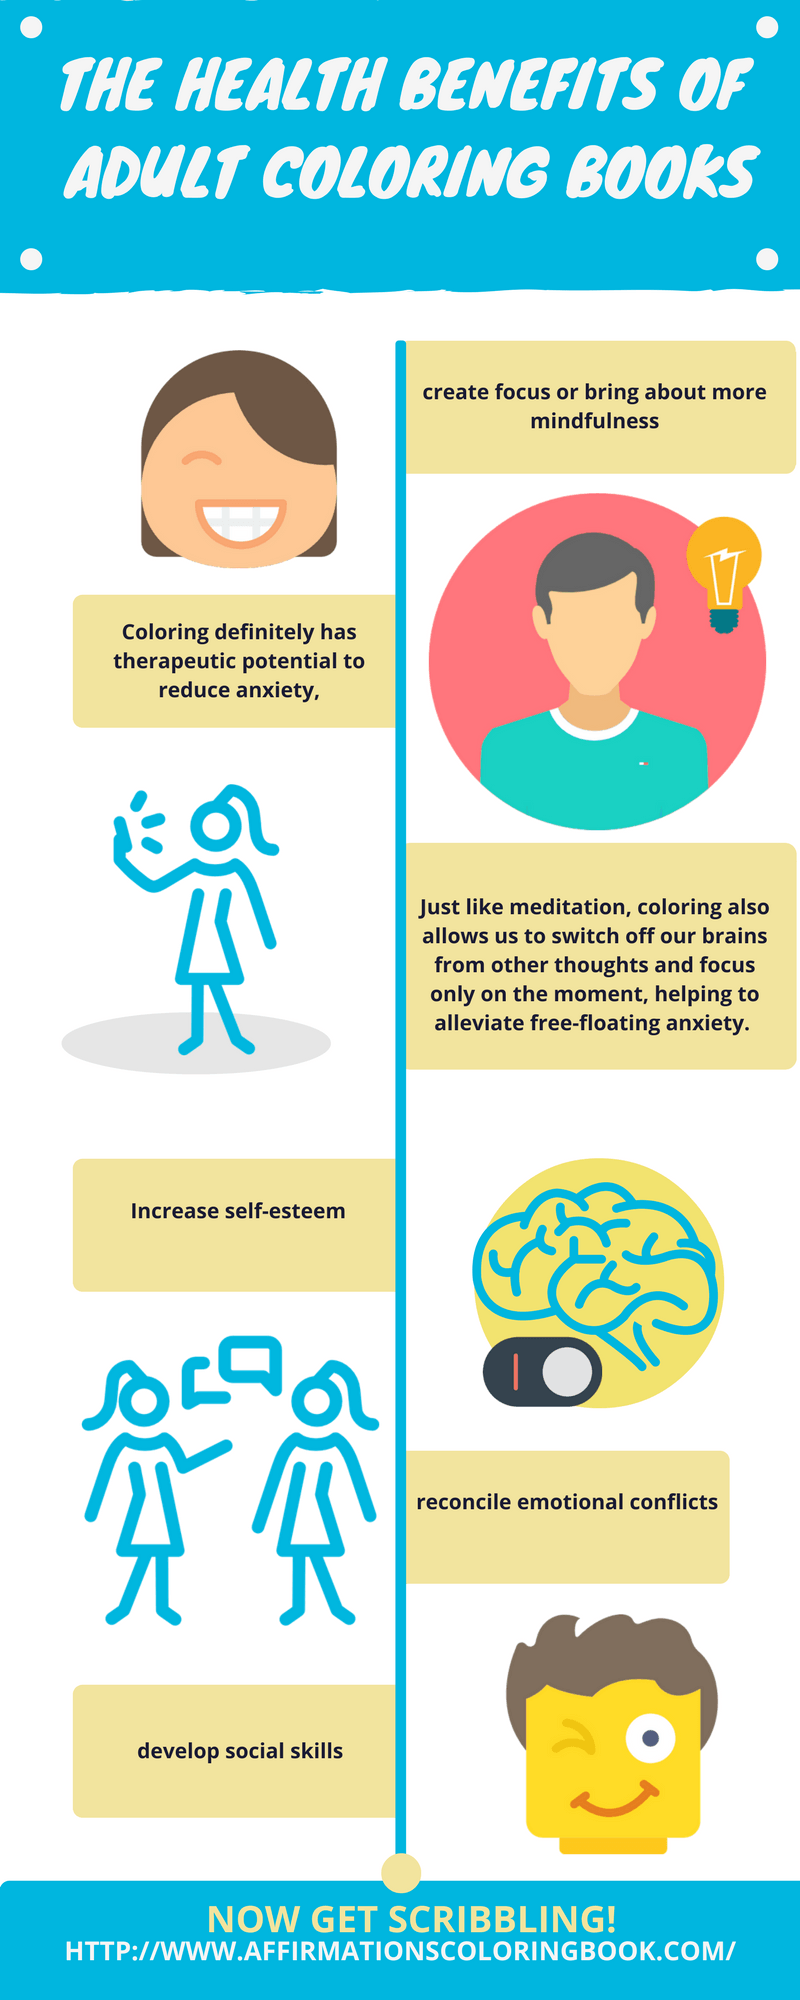 The Healht Benefits of Adult Coloring Books Infographic